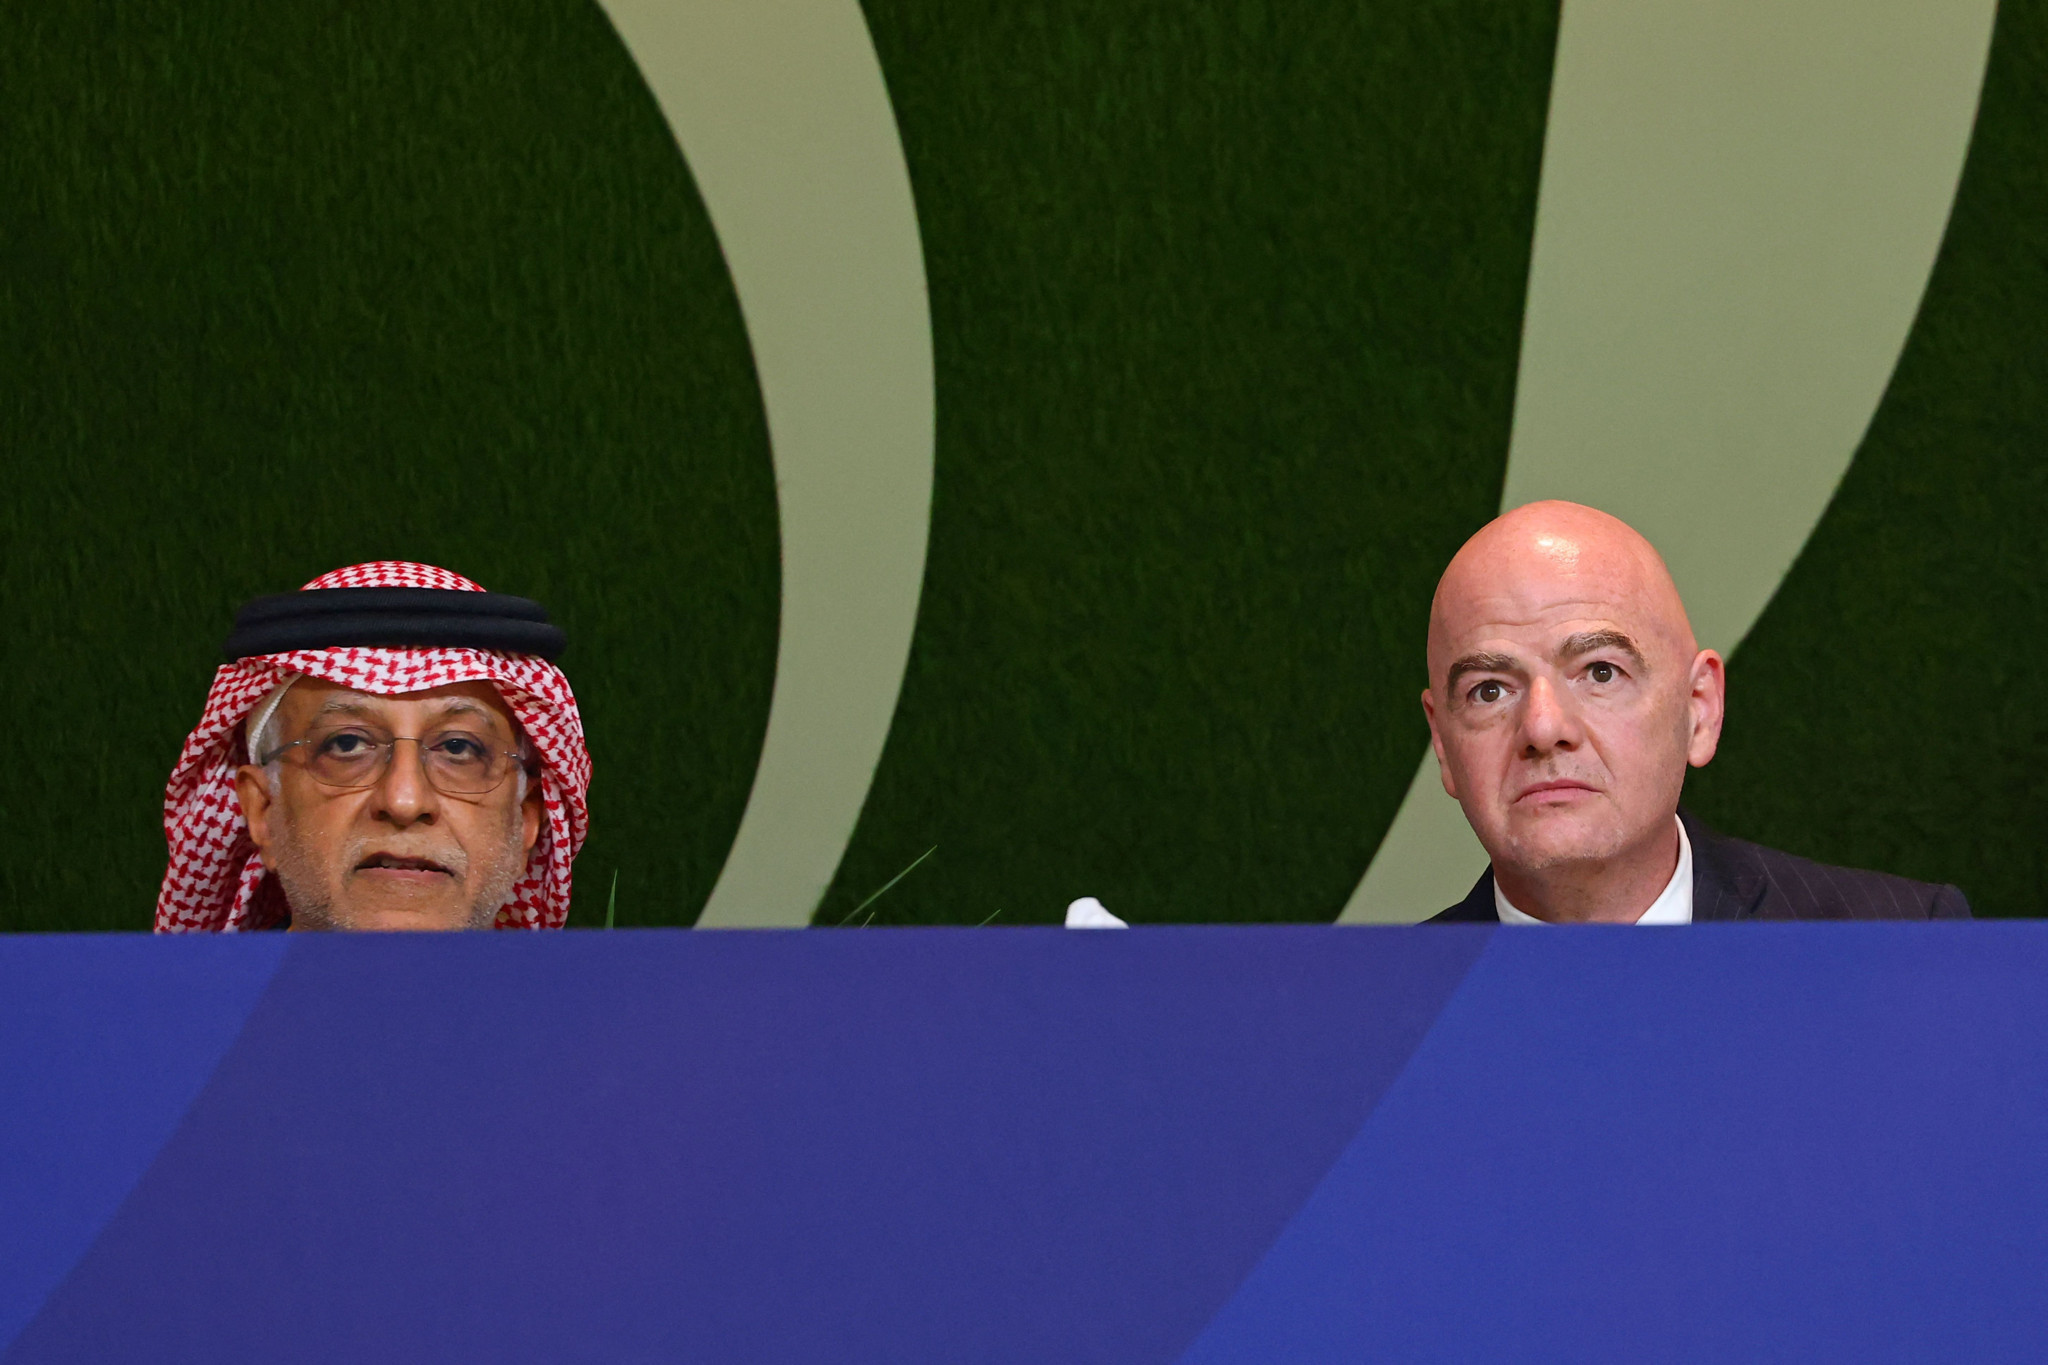 Infantino "honoured and humbled" by election backing from Asia